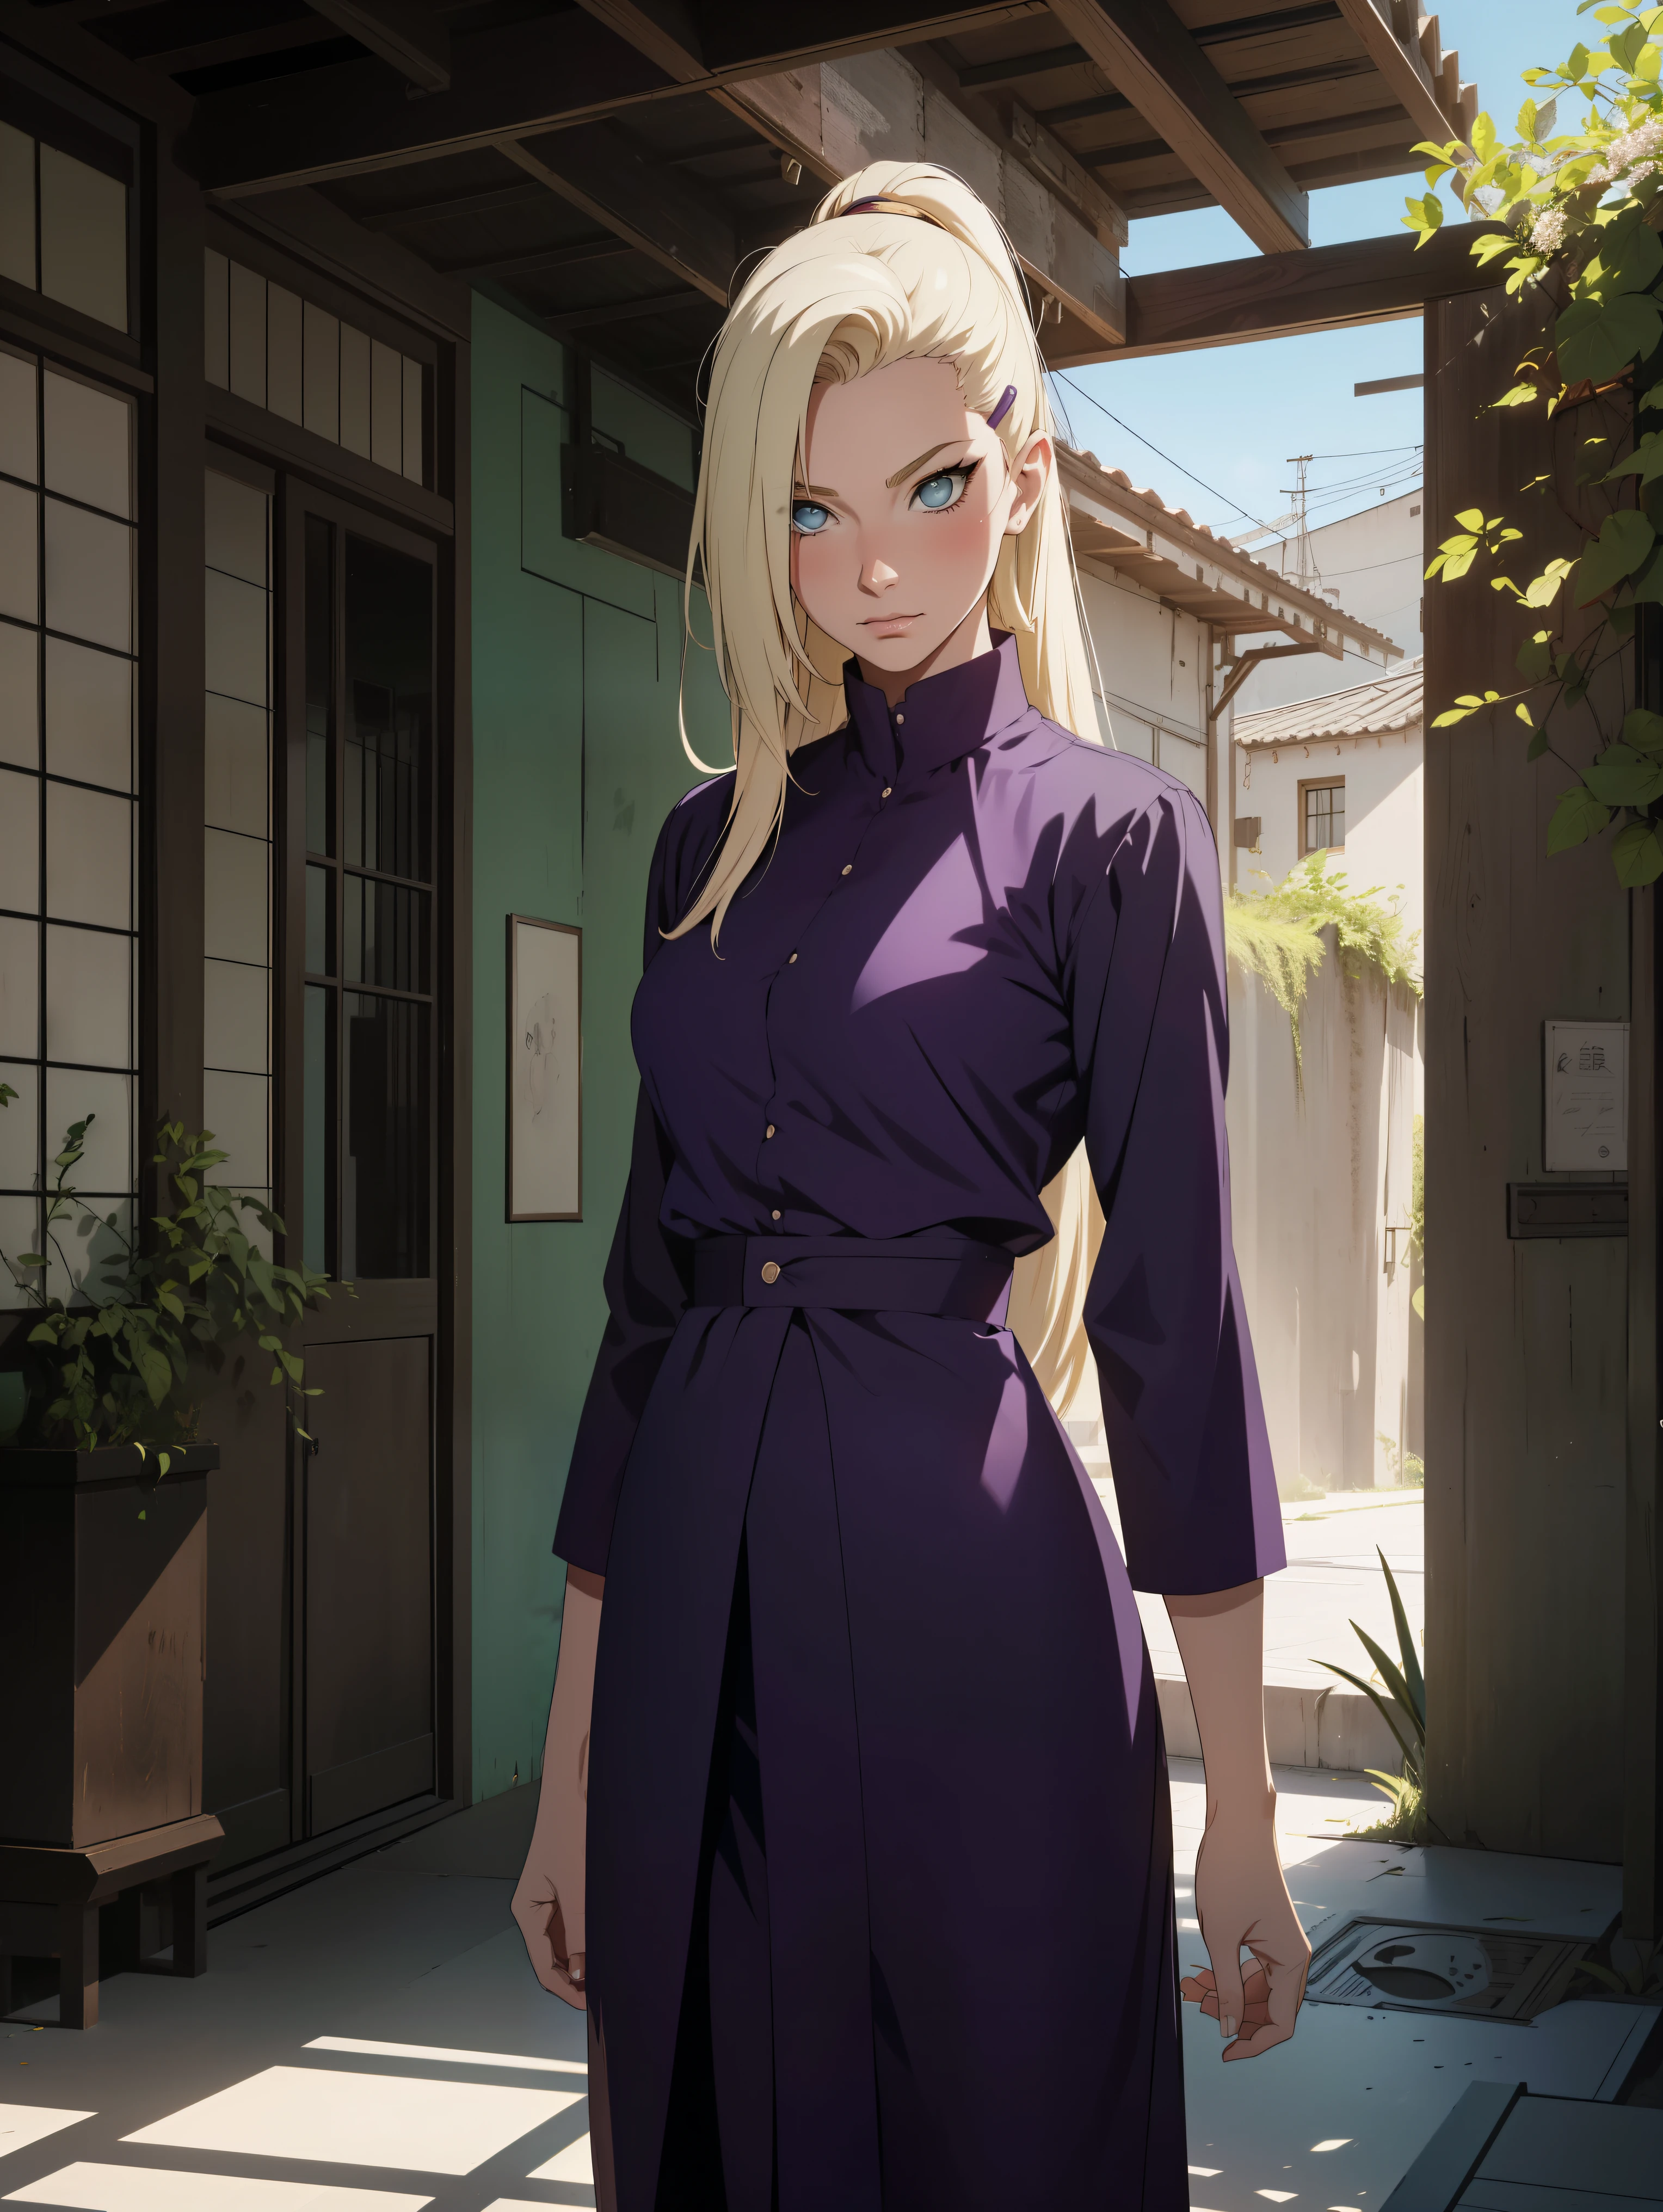 {-error_off_Anatomi:1.0} anime styling, Obra off arte, absurderes, Yamanaka Ino\(naruto\), 1 girl alone, Woman, perfect composition, offtalhado lips, beautiful  face, Body Proportion, blush, hair long blonde, blue colored eyes, purple blouse, purple pants, soft gauze, super realistico, offtalhado, sessão off fotos, Realistic faces and bodies, Obra off arte, melhor qualidaoff, Best illustration, hiper offtalhado, 1 Woman, standing alone, glamorous, blushful, trunk, fighting, about nature, Look at the view, poses dimânicas,